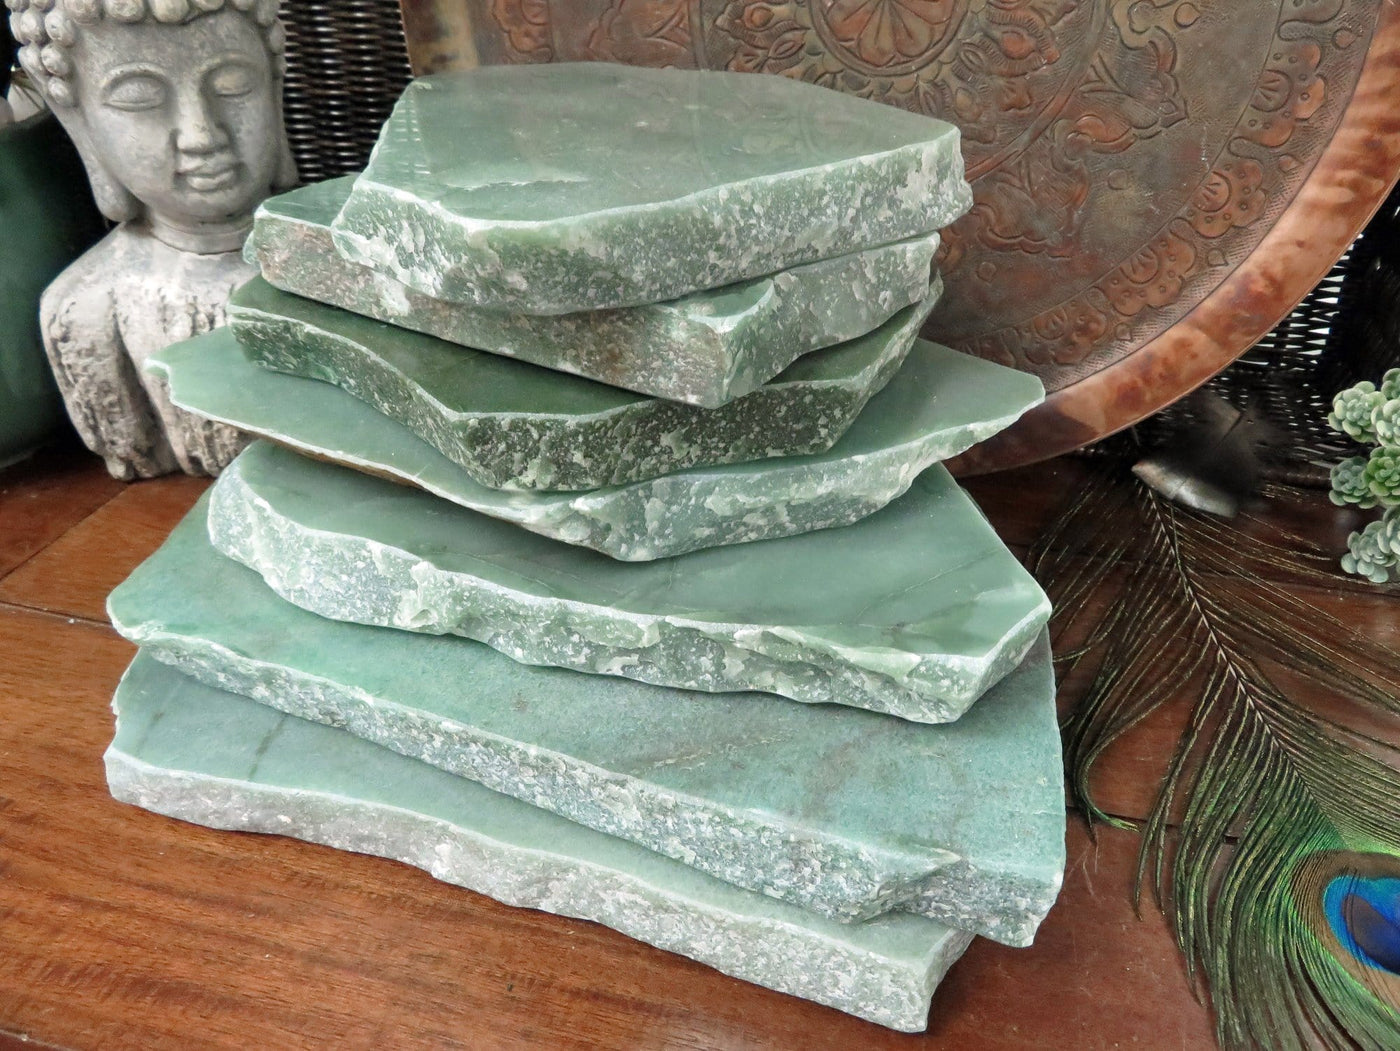 7 green quartz platters stacked up